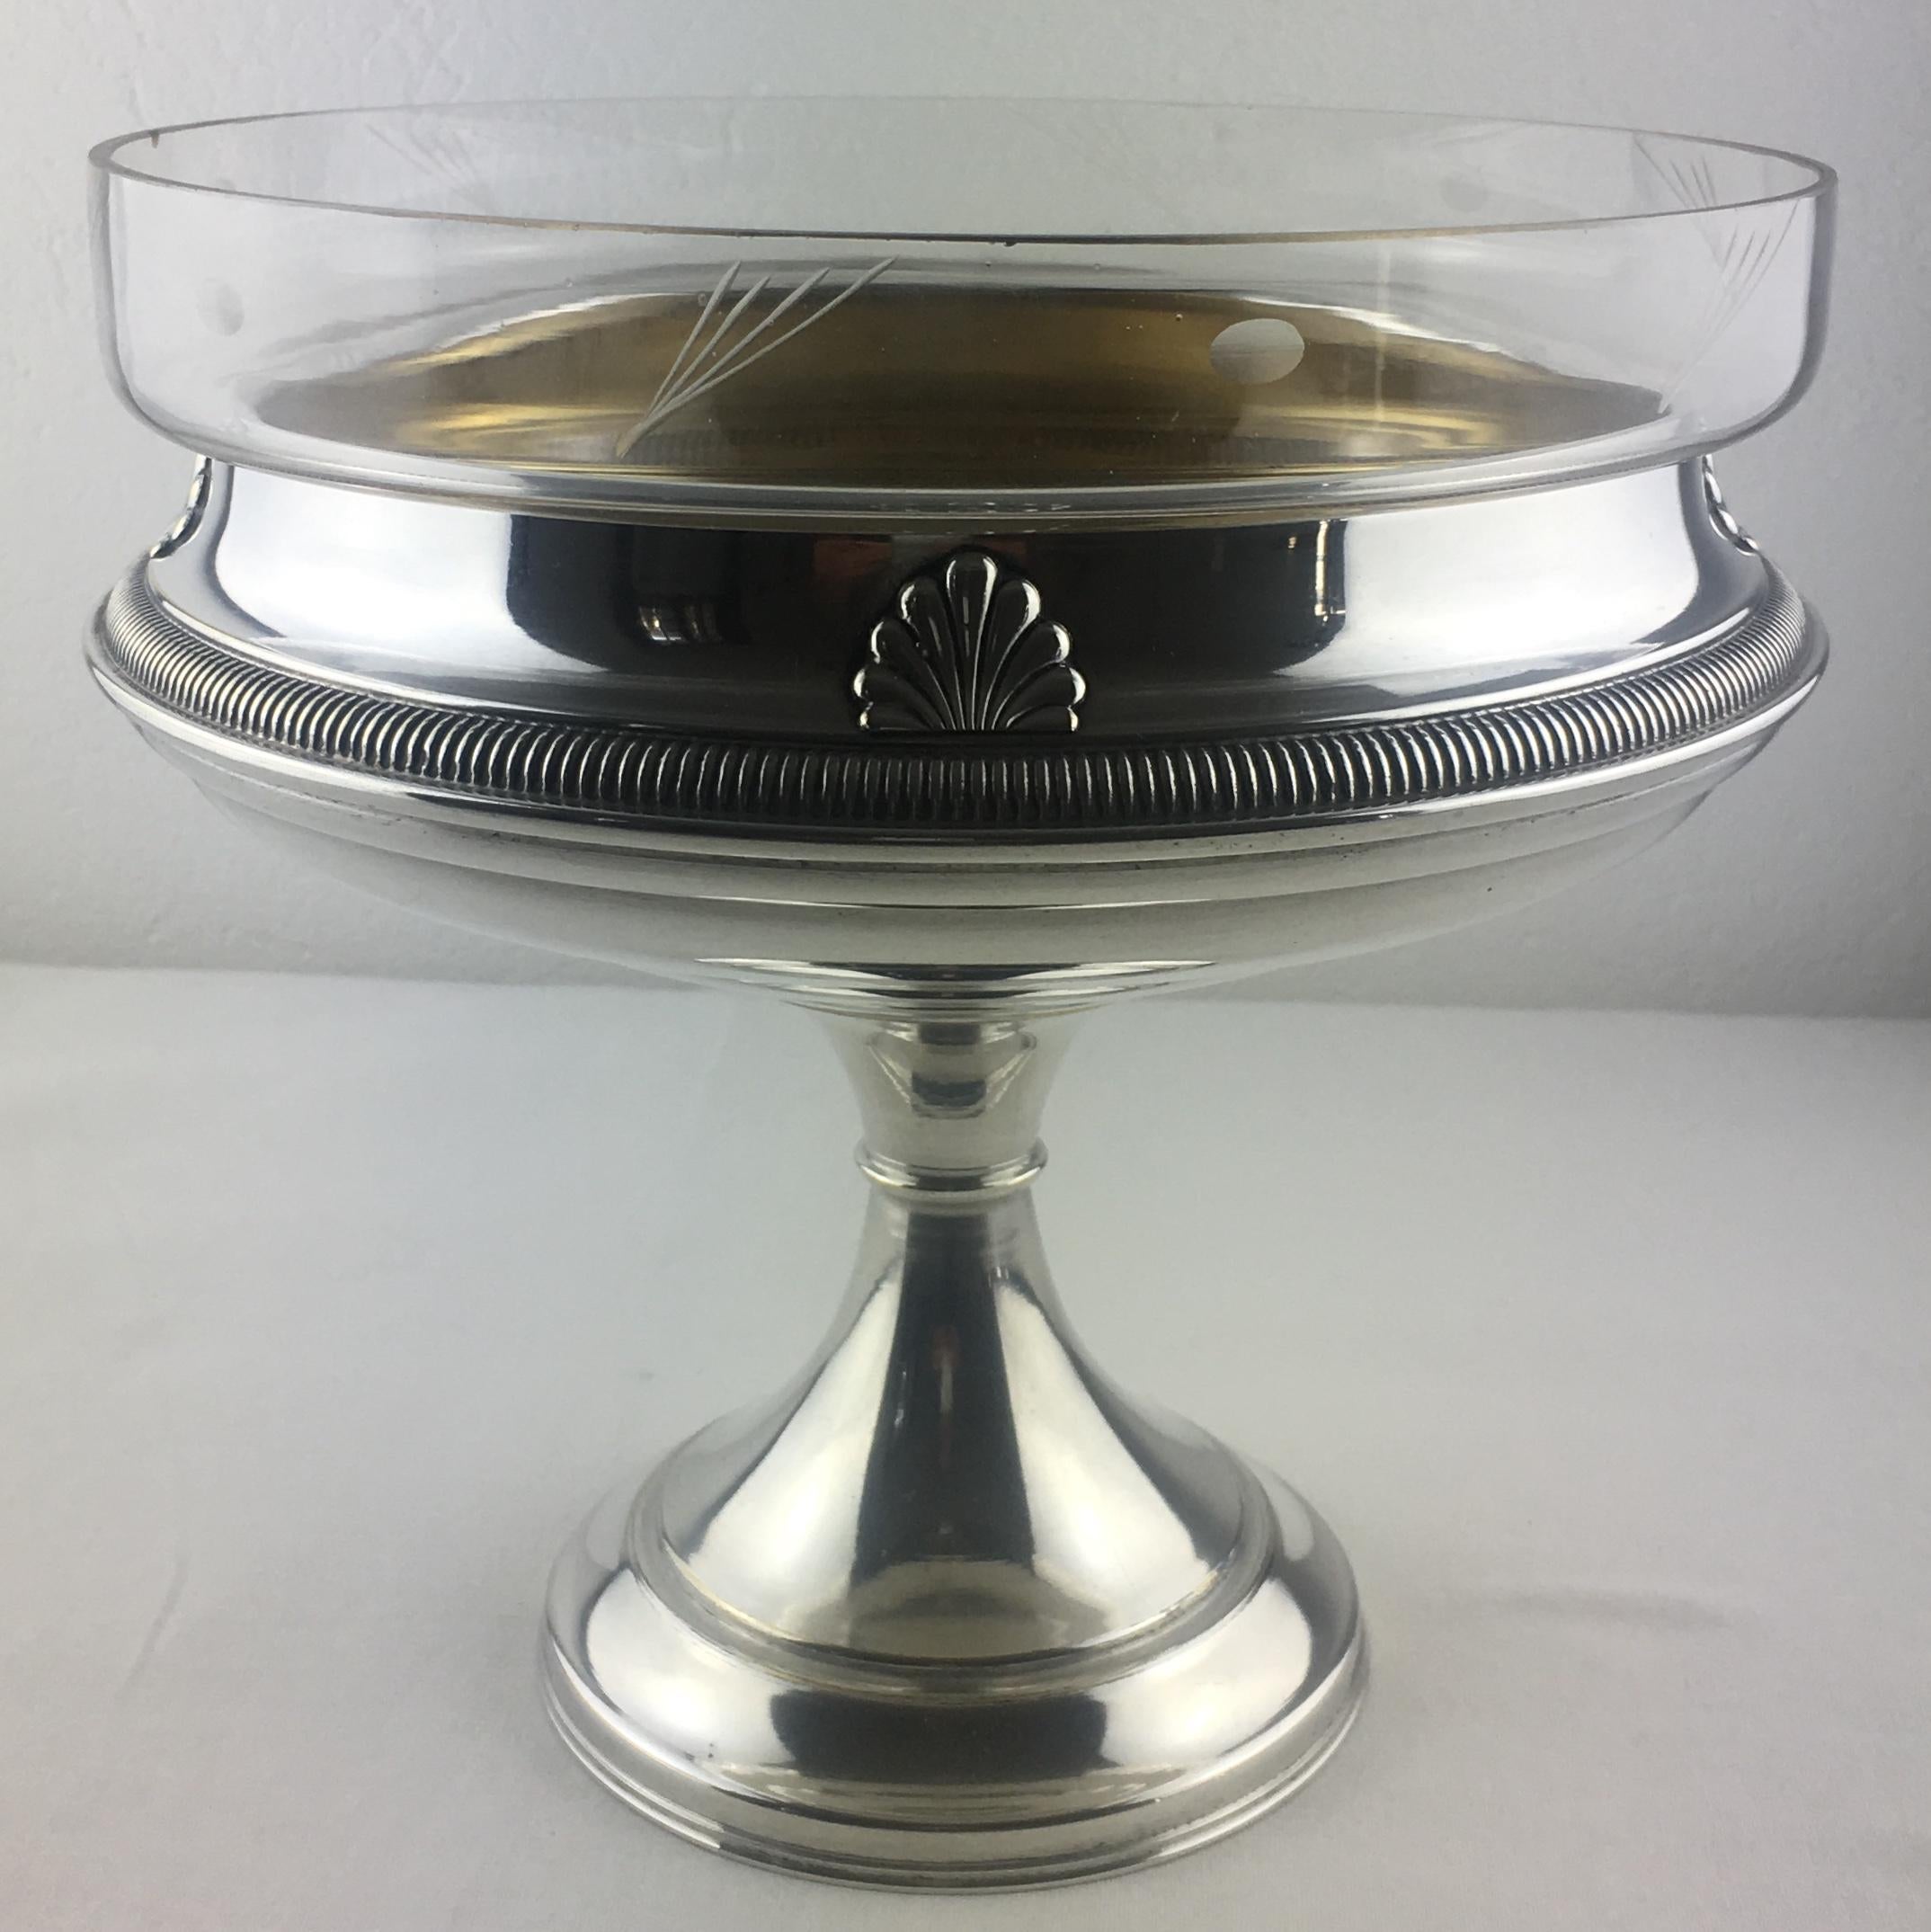 French Art Deco chalice centerpiece, fruit bowl. Very stylish pedestal in silver plate with classic Art Deco details on this piece. Insert bowl is in clear glass. Visible markers mark on the bottom of the stand.

This early 20th century French Art